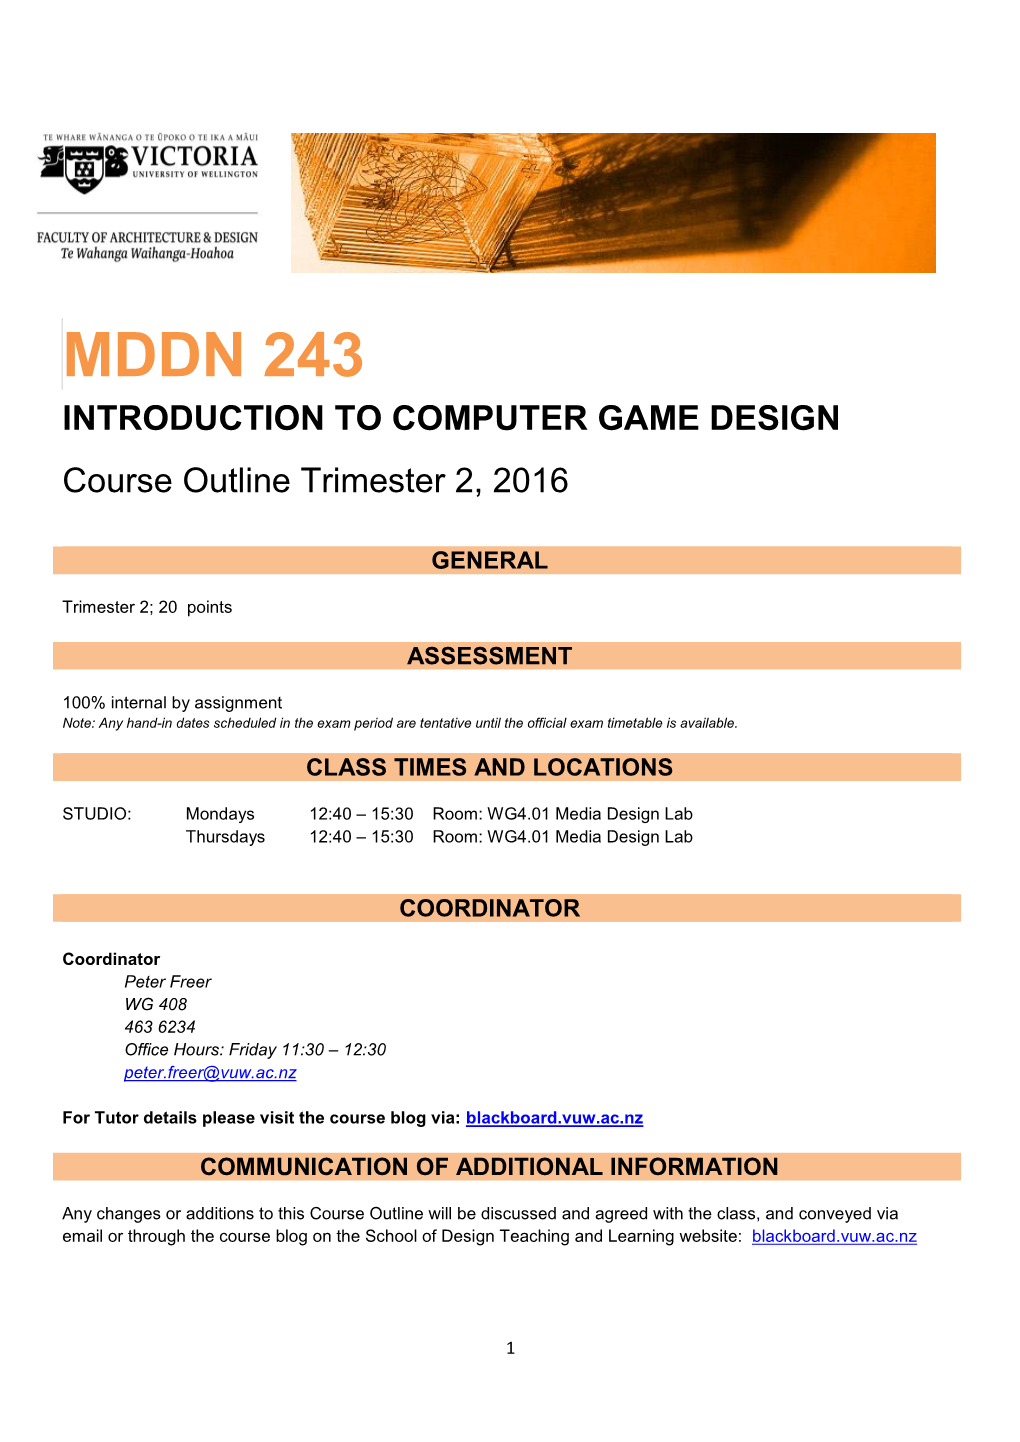 MDDN 243 INTRODUCTION to COMPUTER GAME DESIGN Course Outline Trimester 2, 2016